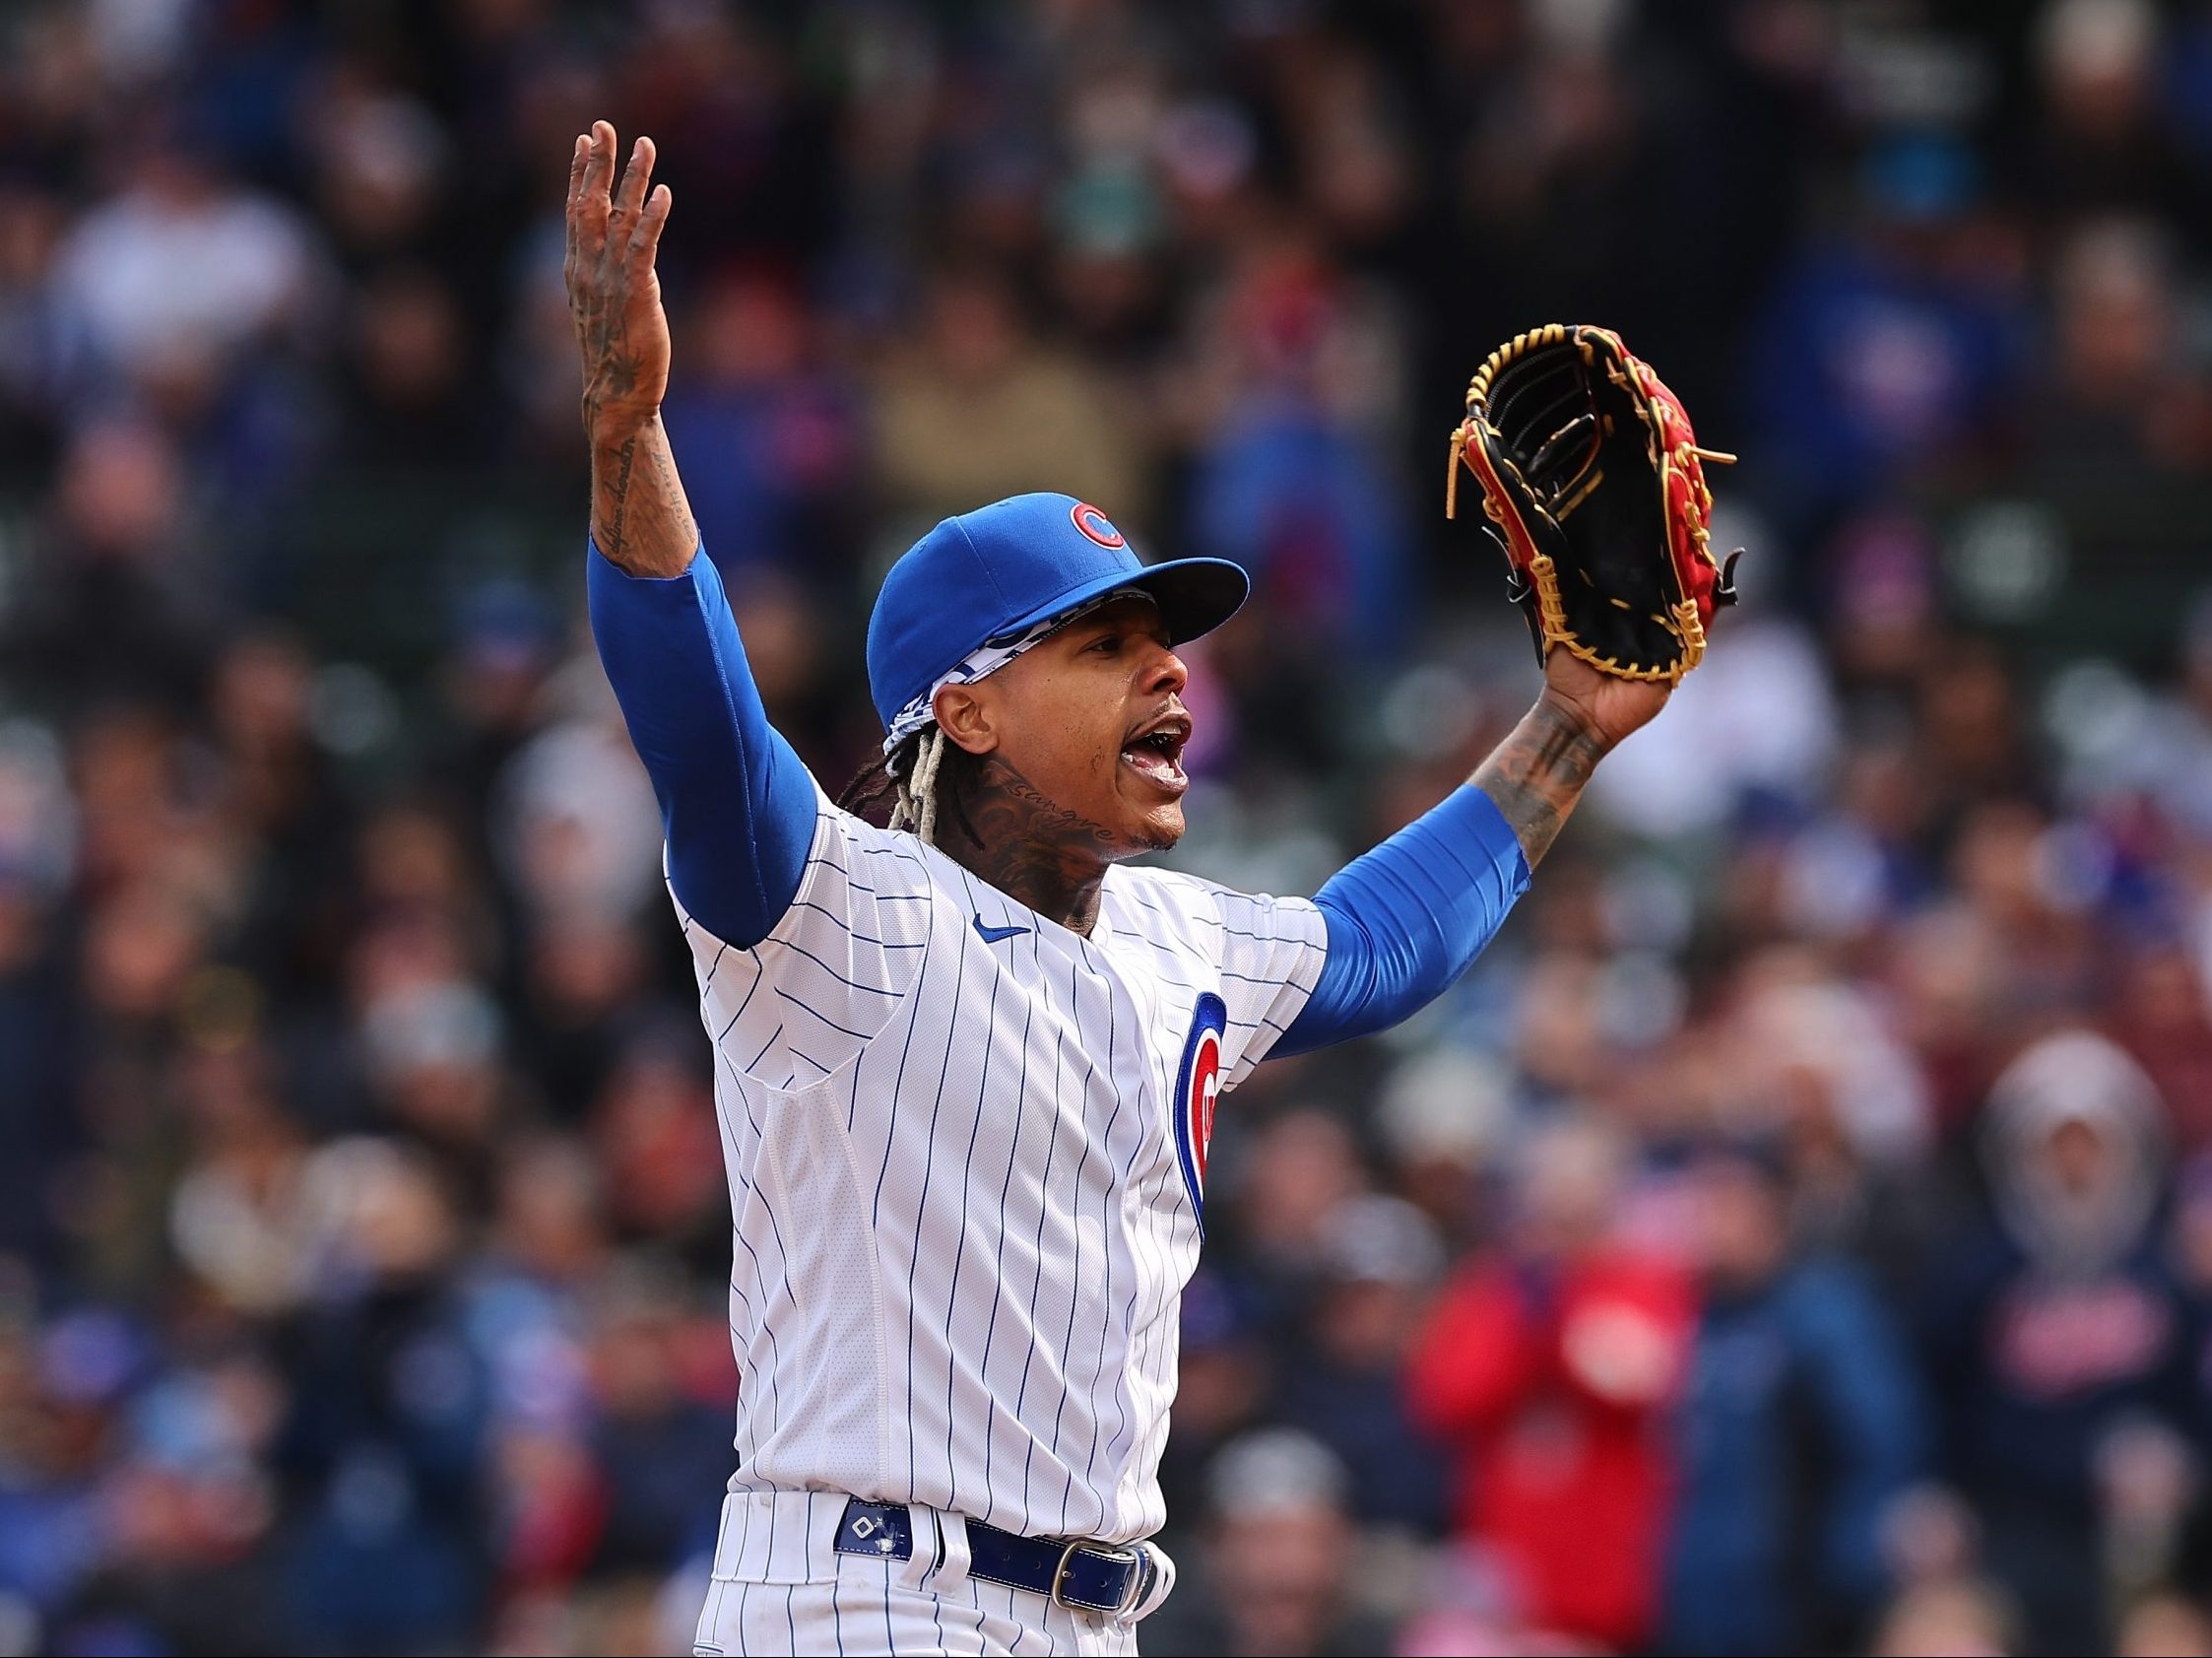 Cubs pitcher Marcus Stroman tweets support for Pride Month, LGBTQ fans -  Outsports